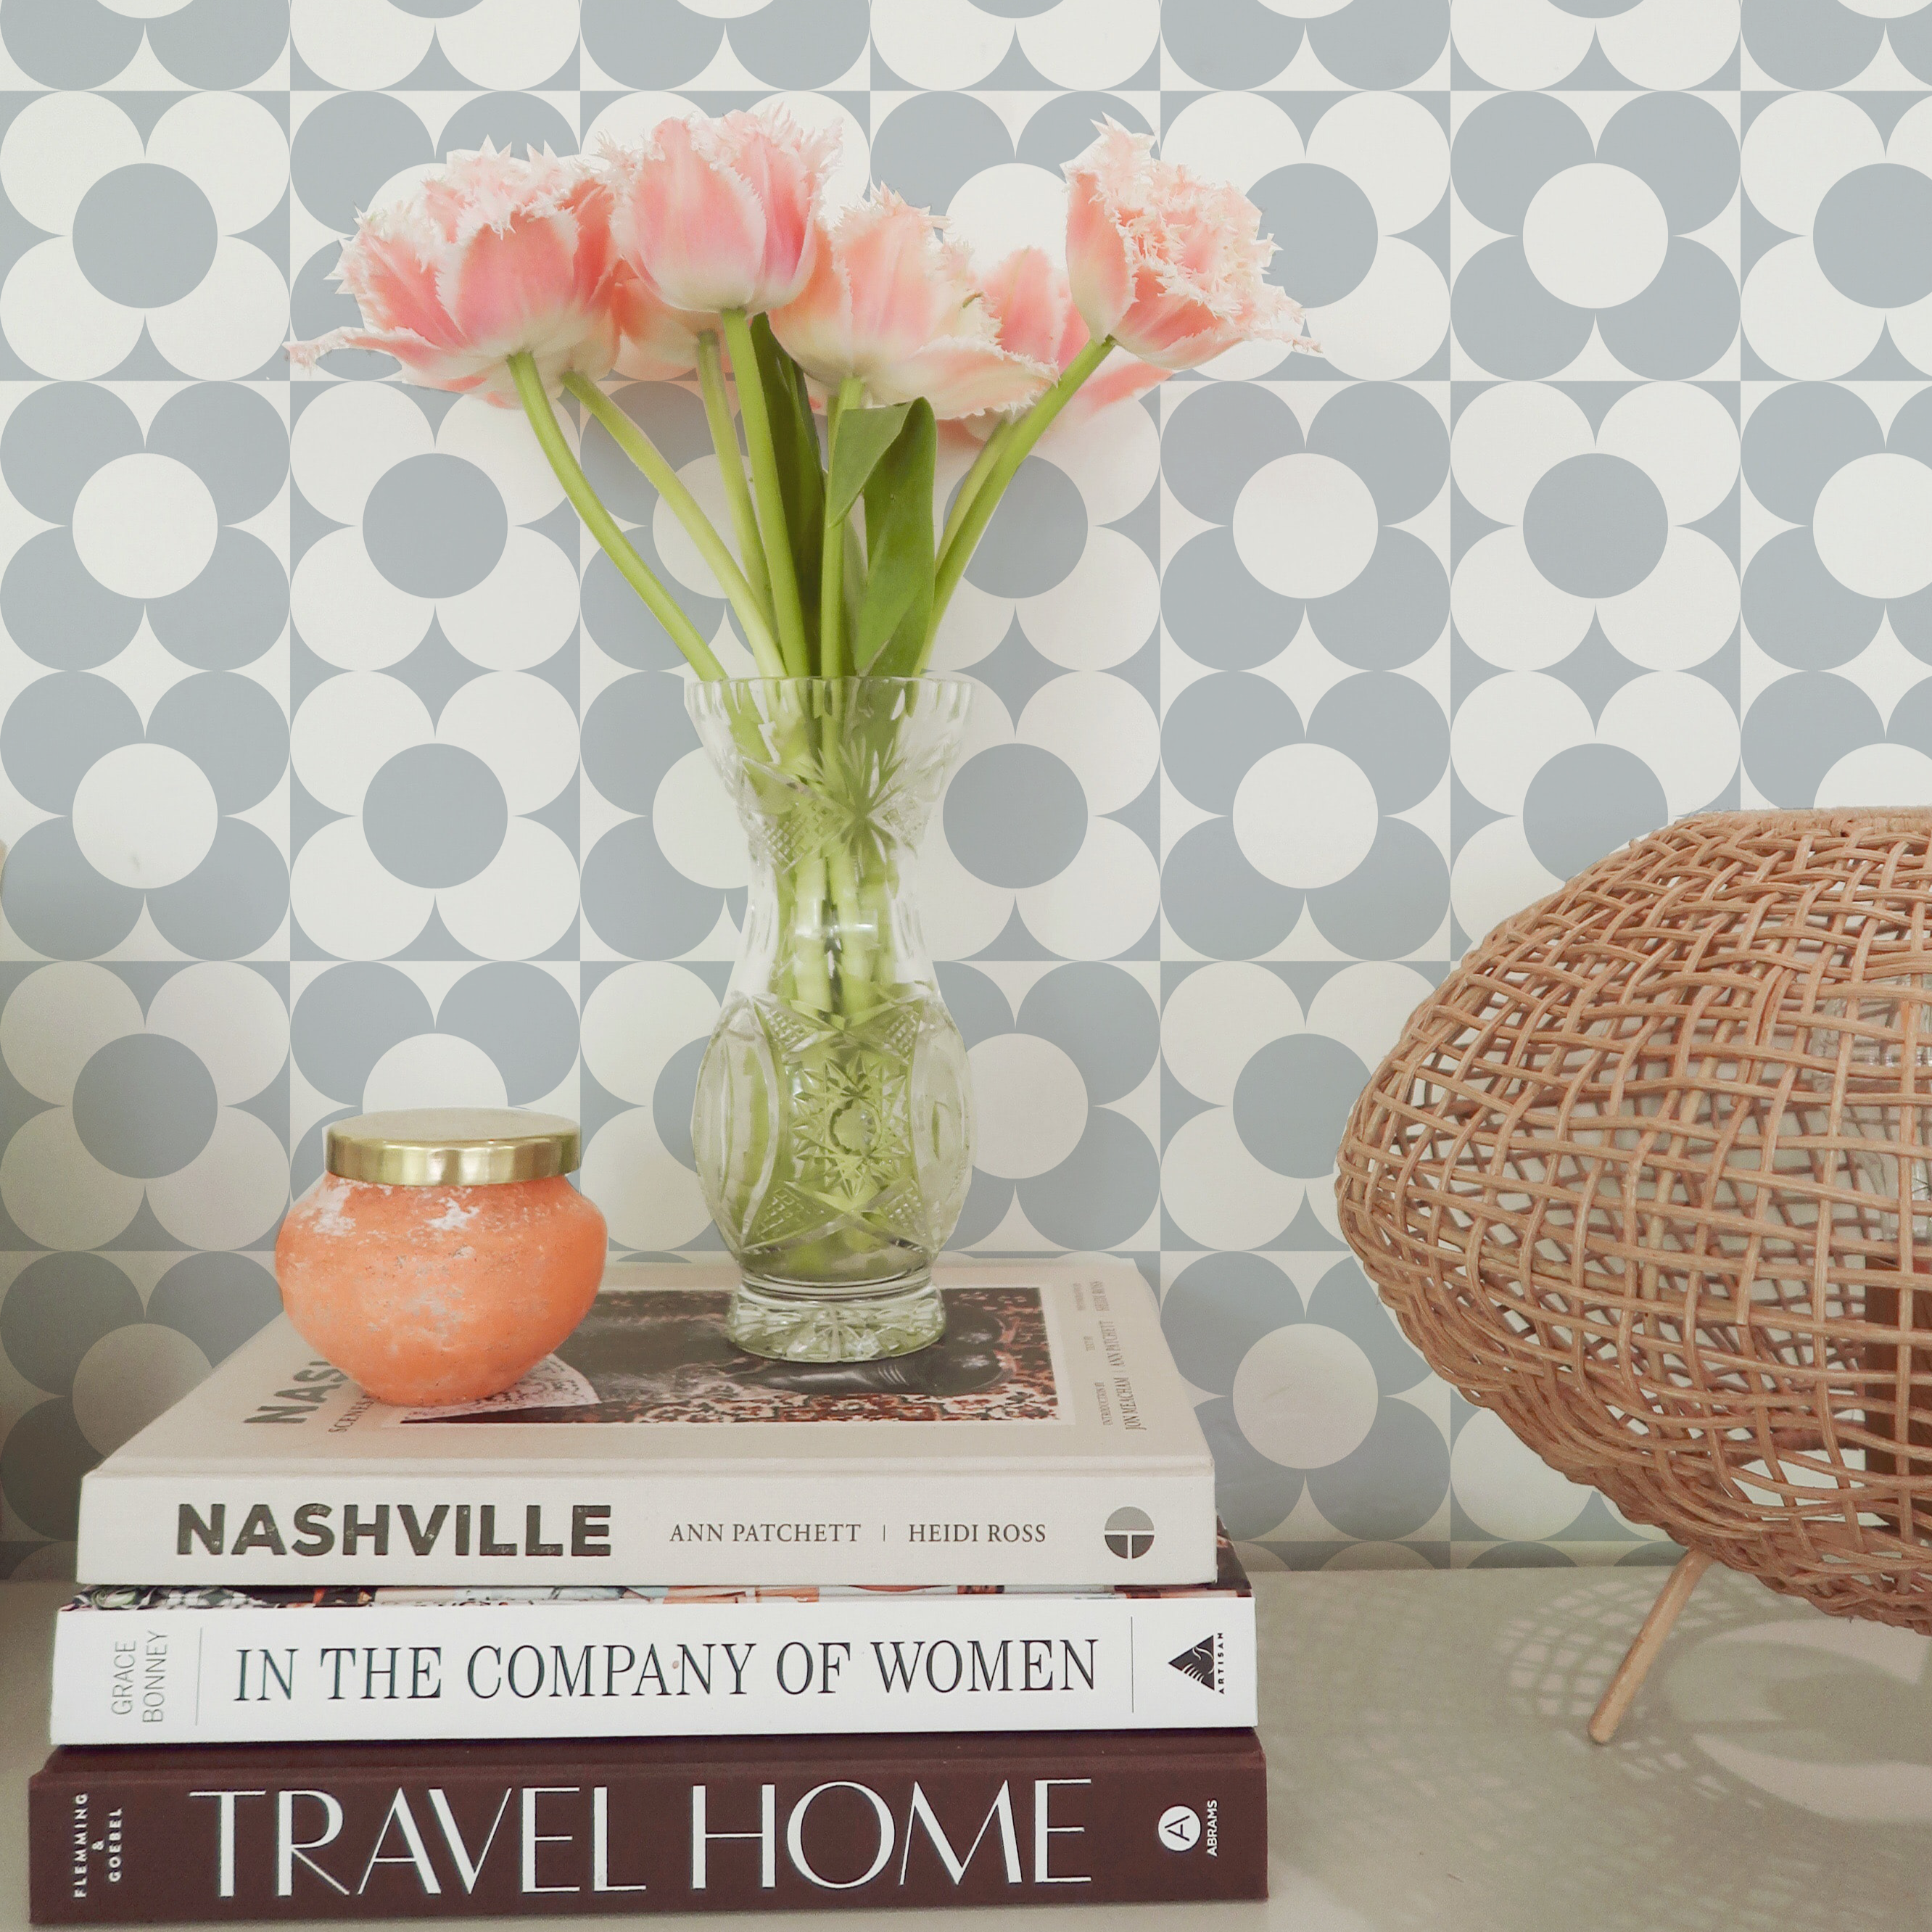 Elegant home decor setup with Vintage Groovy Wallpaper - Pale Blue as a backdrop, featuring a vase of fresh pink tulips, a rattan chair, and a stack of books, creating a chic and inviting atmosphere.